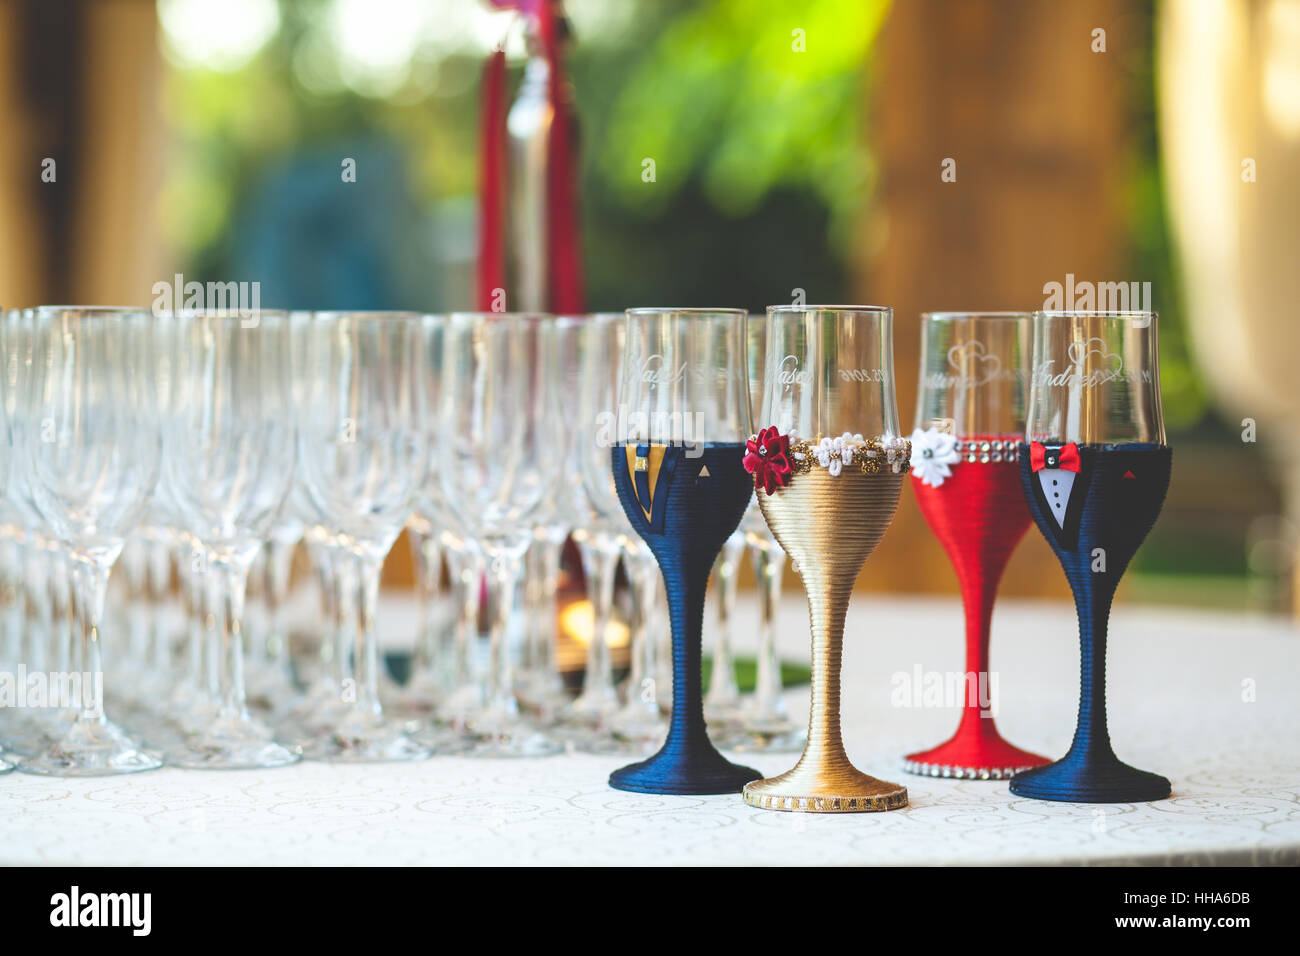 wedding champagne glasses decorations for bride groom and witnesses on a table Stock Photo